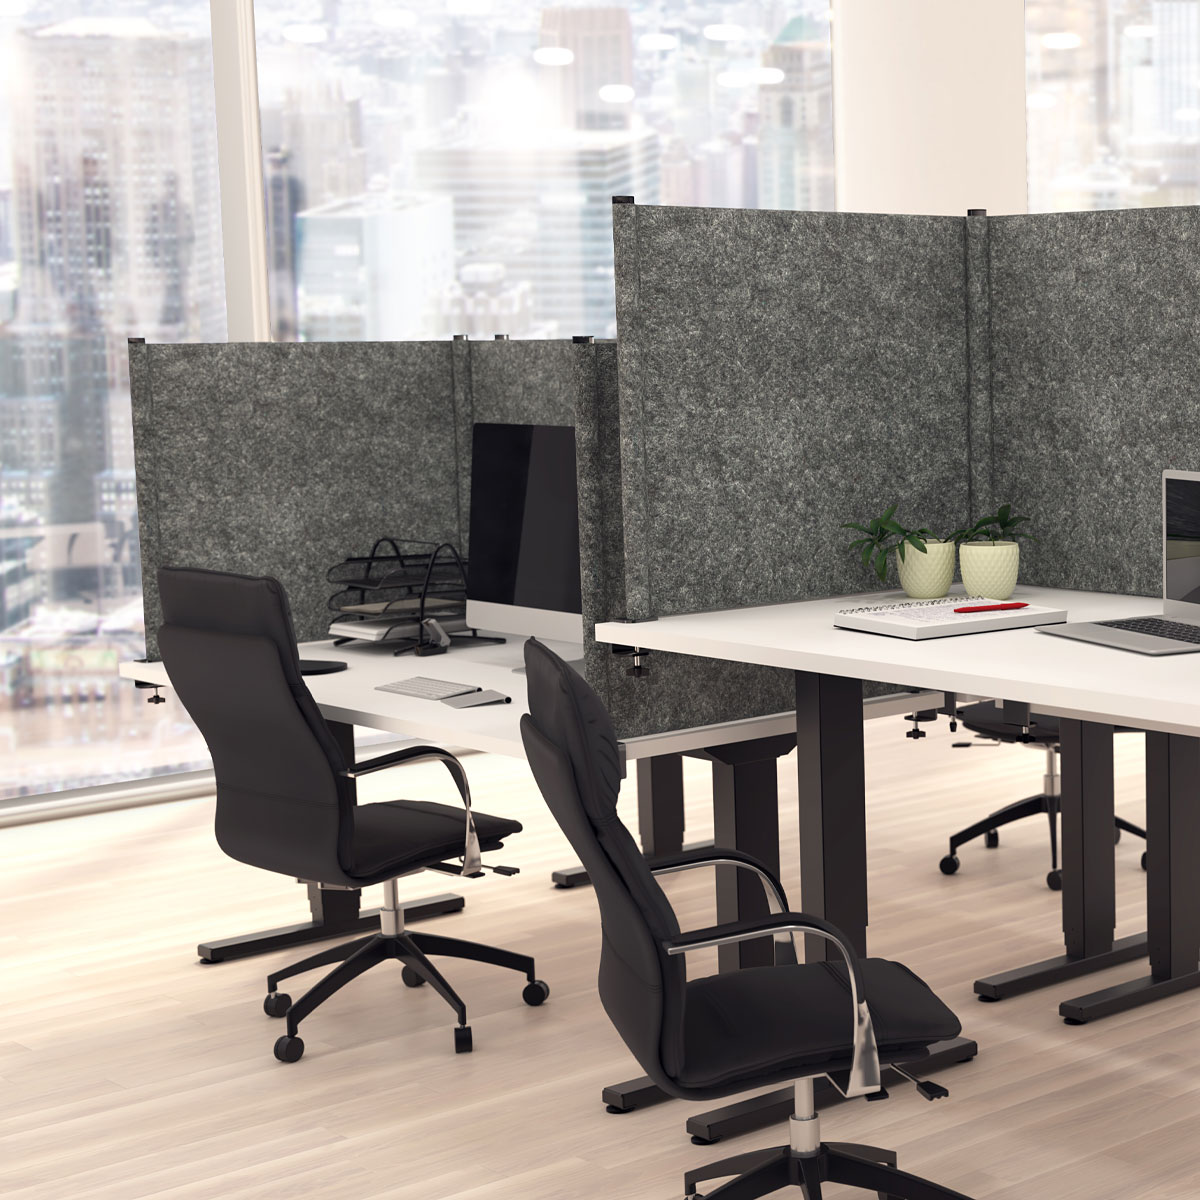 privacy screens around a group of desks in an office